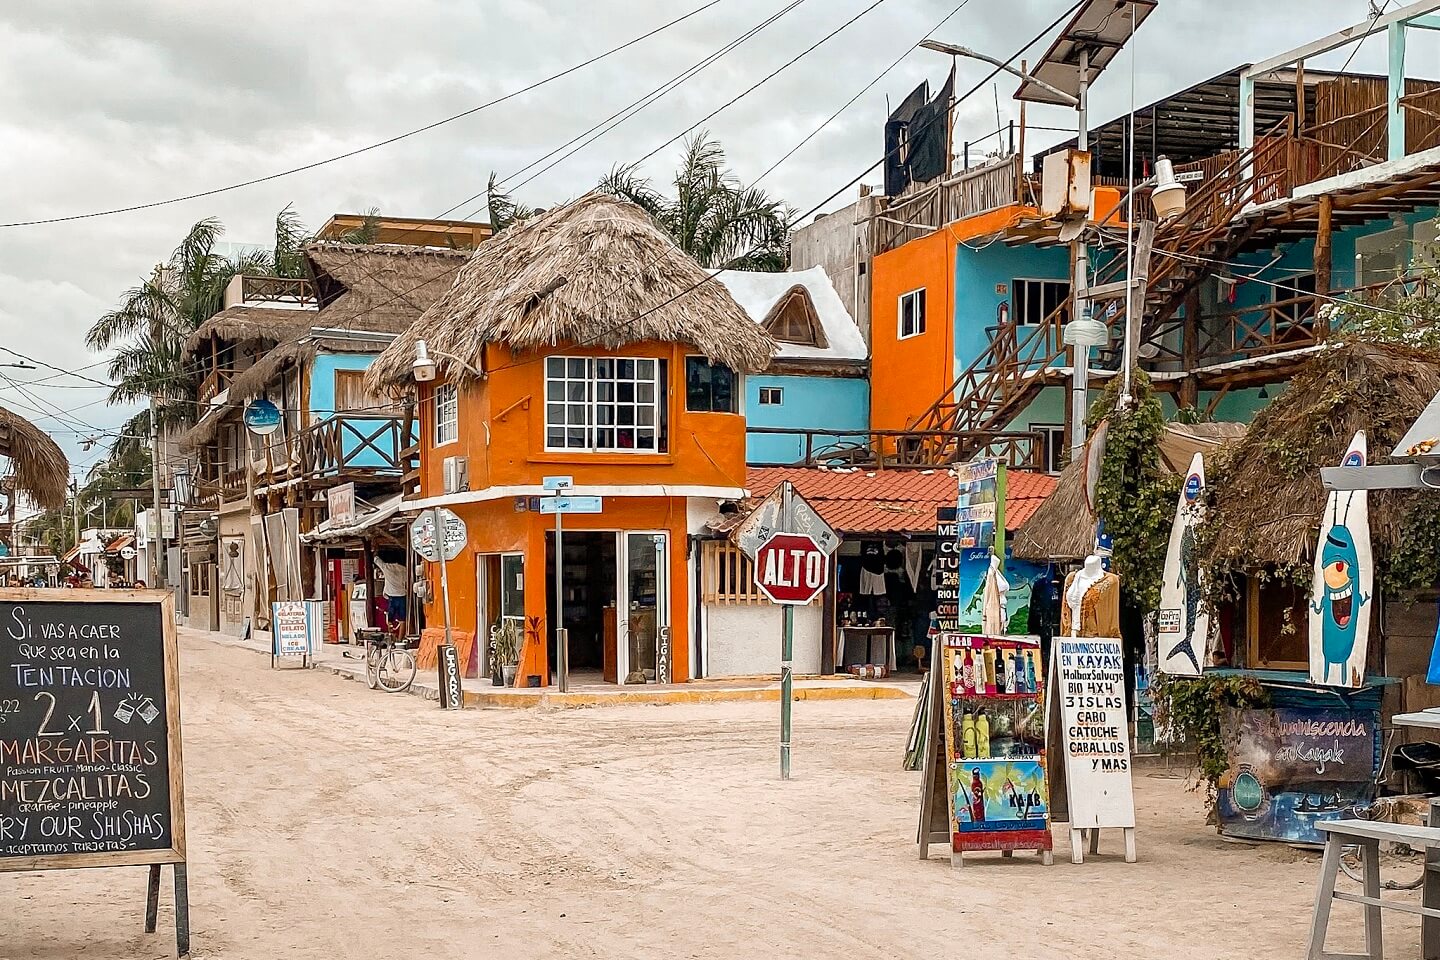 things to do in holbox